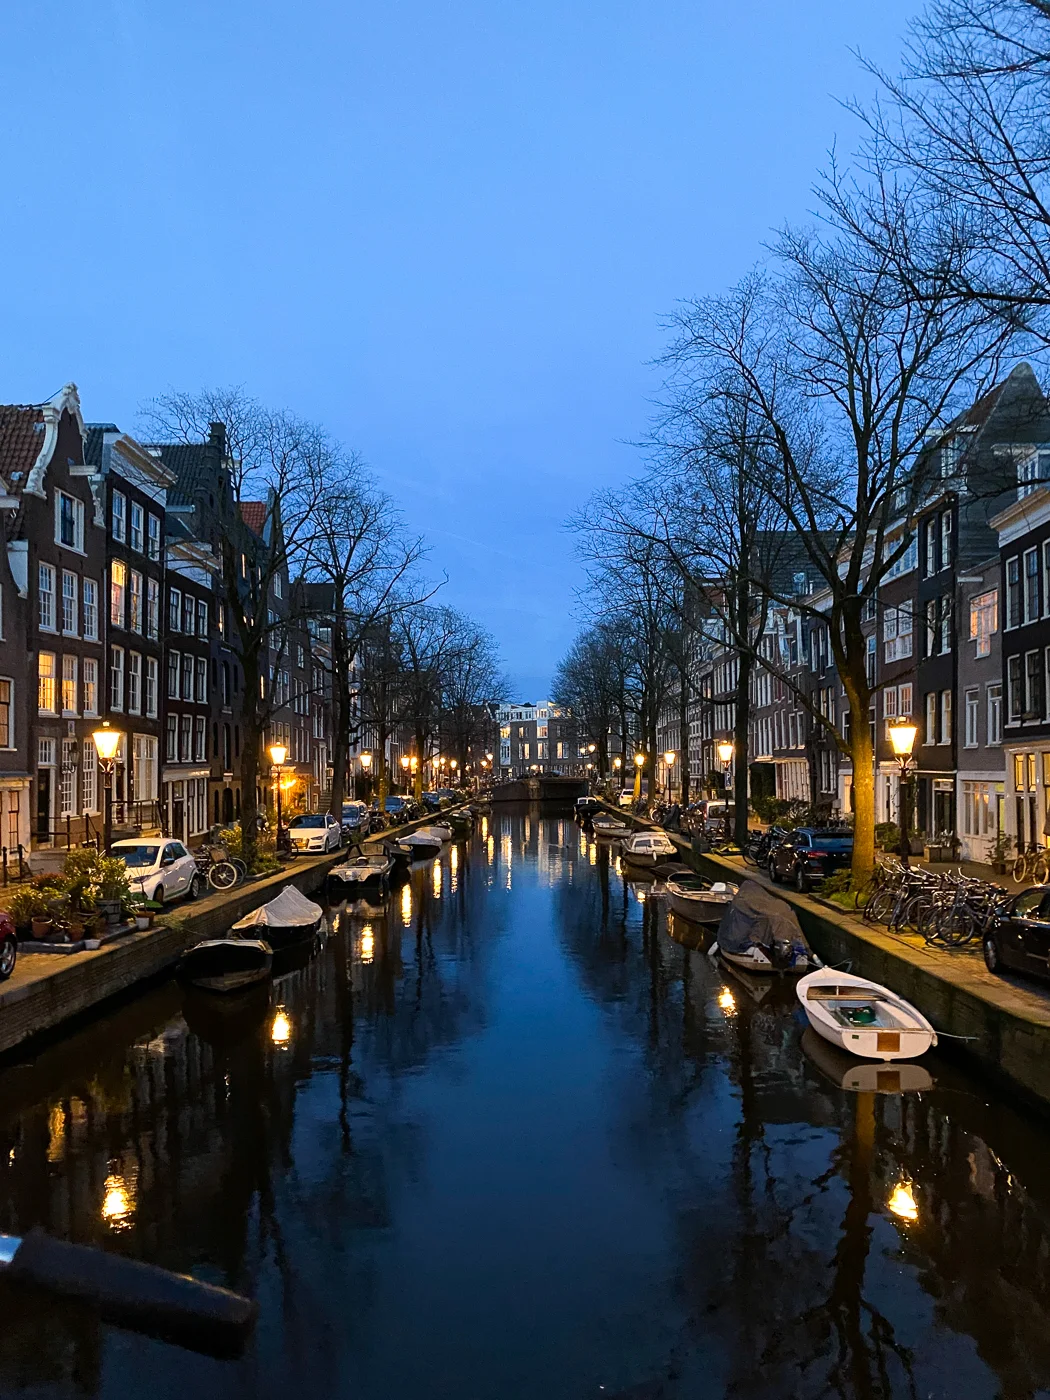 3 day amsterdam itinerary, best things to do in amsterdam, jordaan canal houses, amsterdam at night